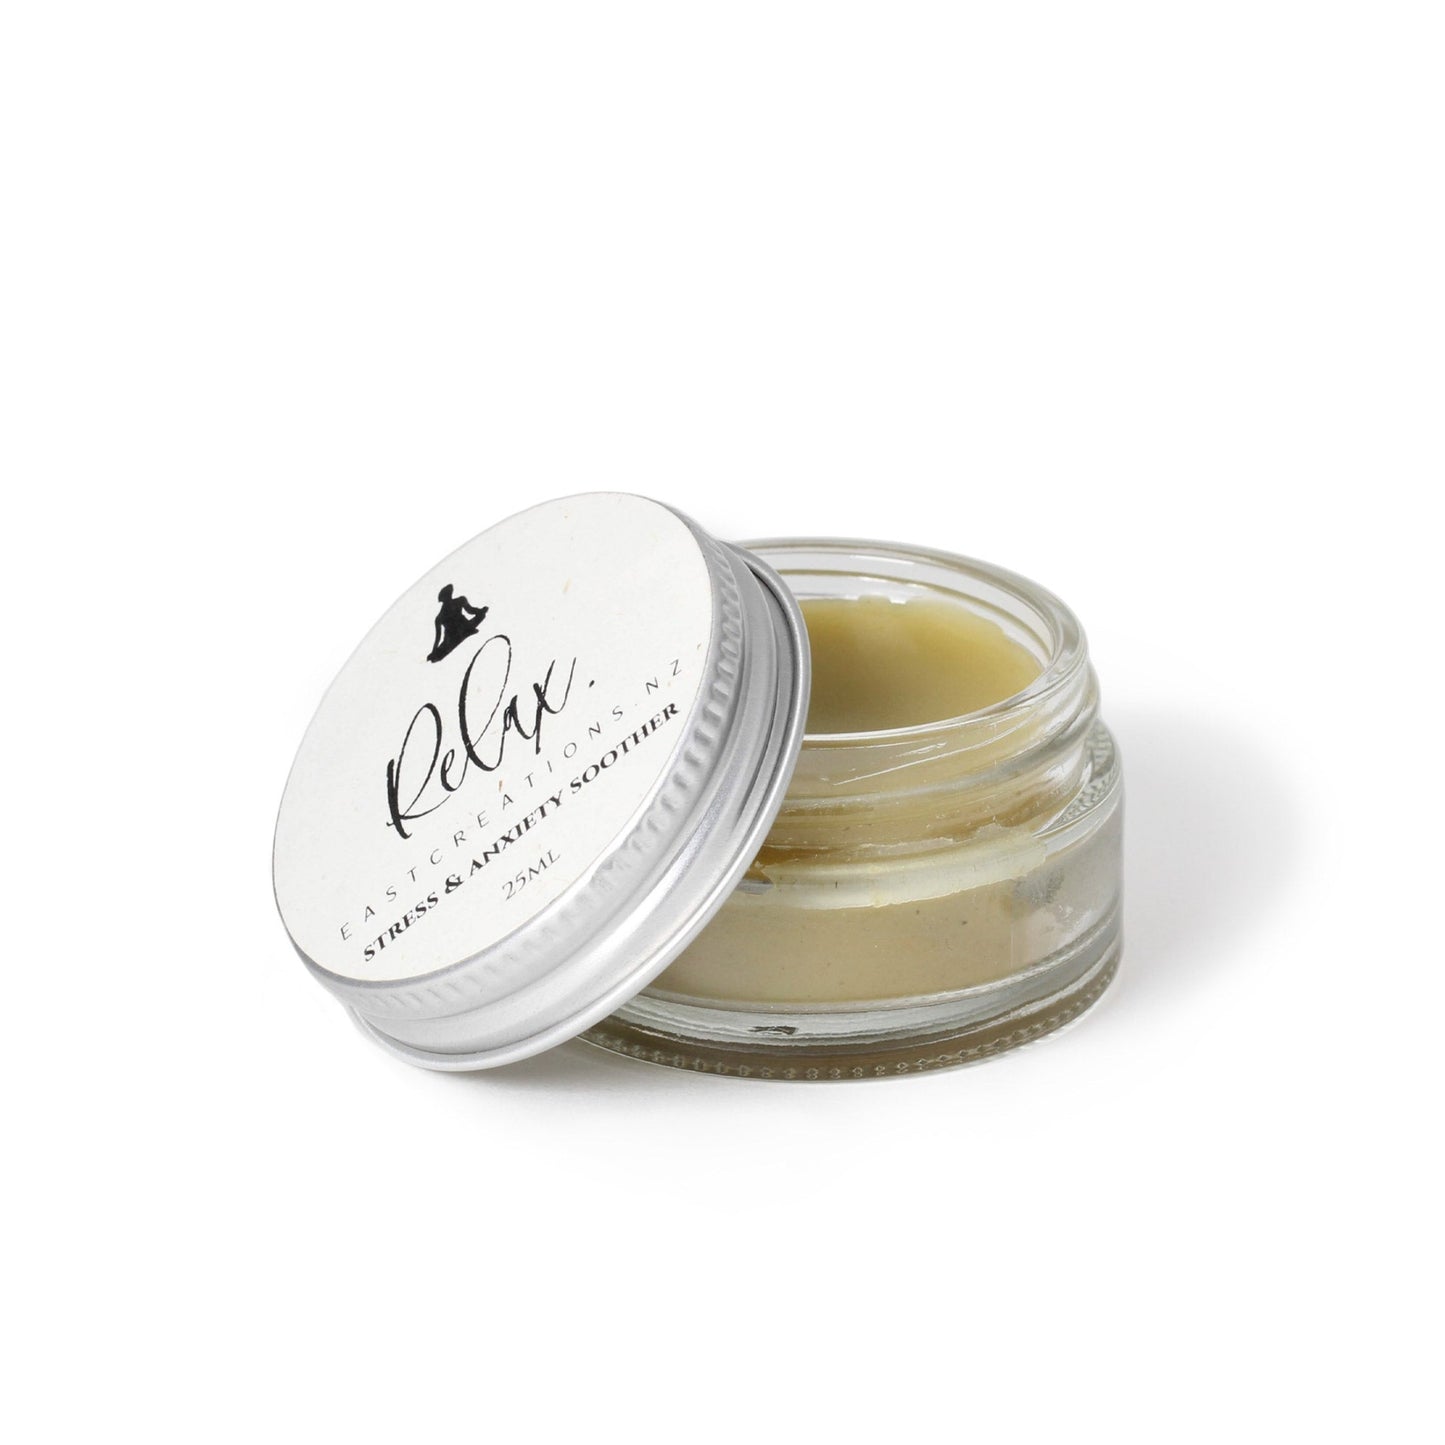 Anxiety Soother Balm